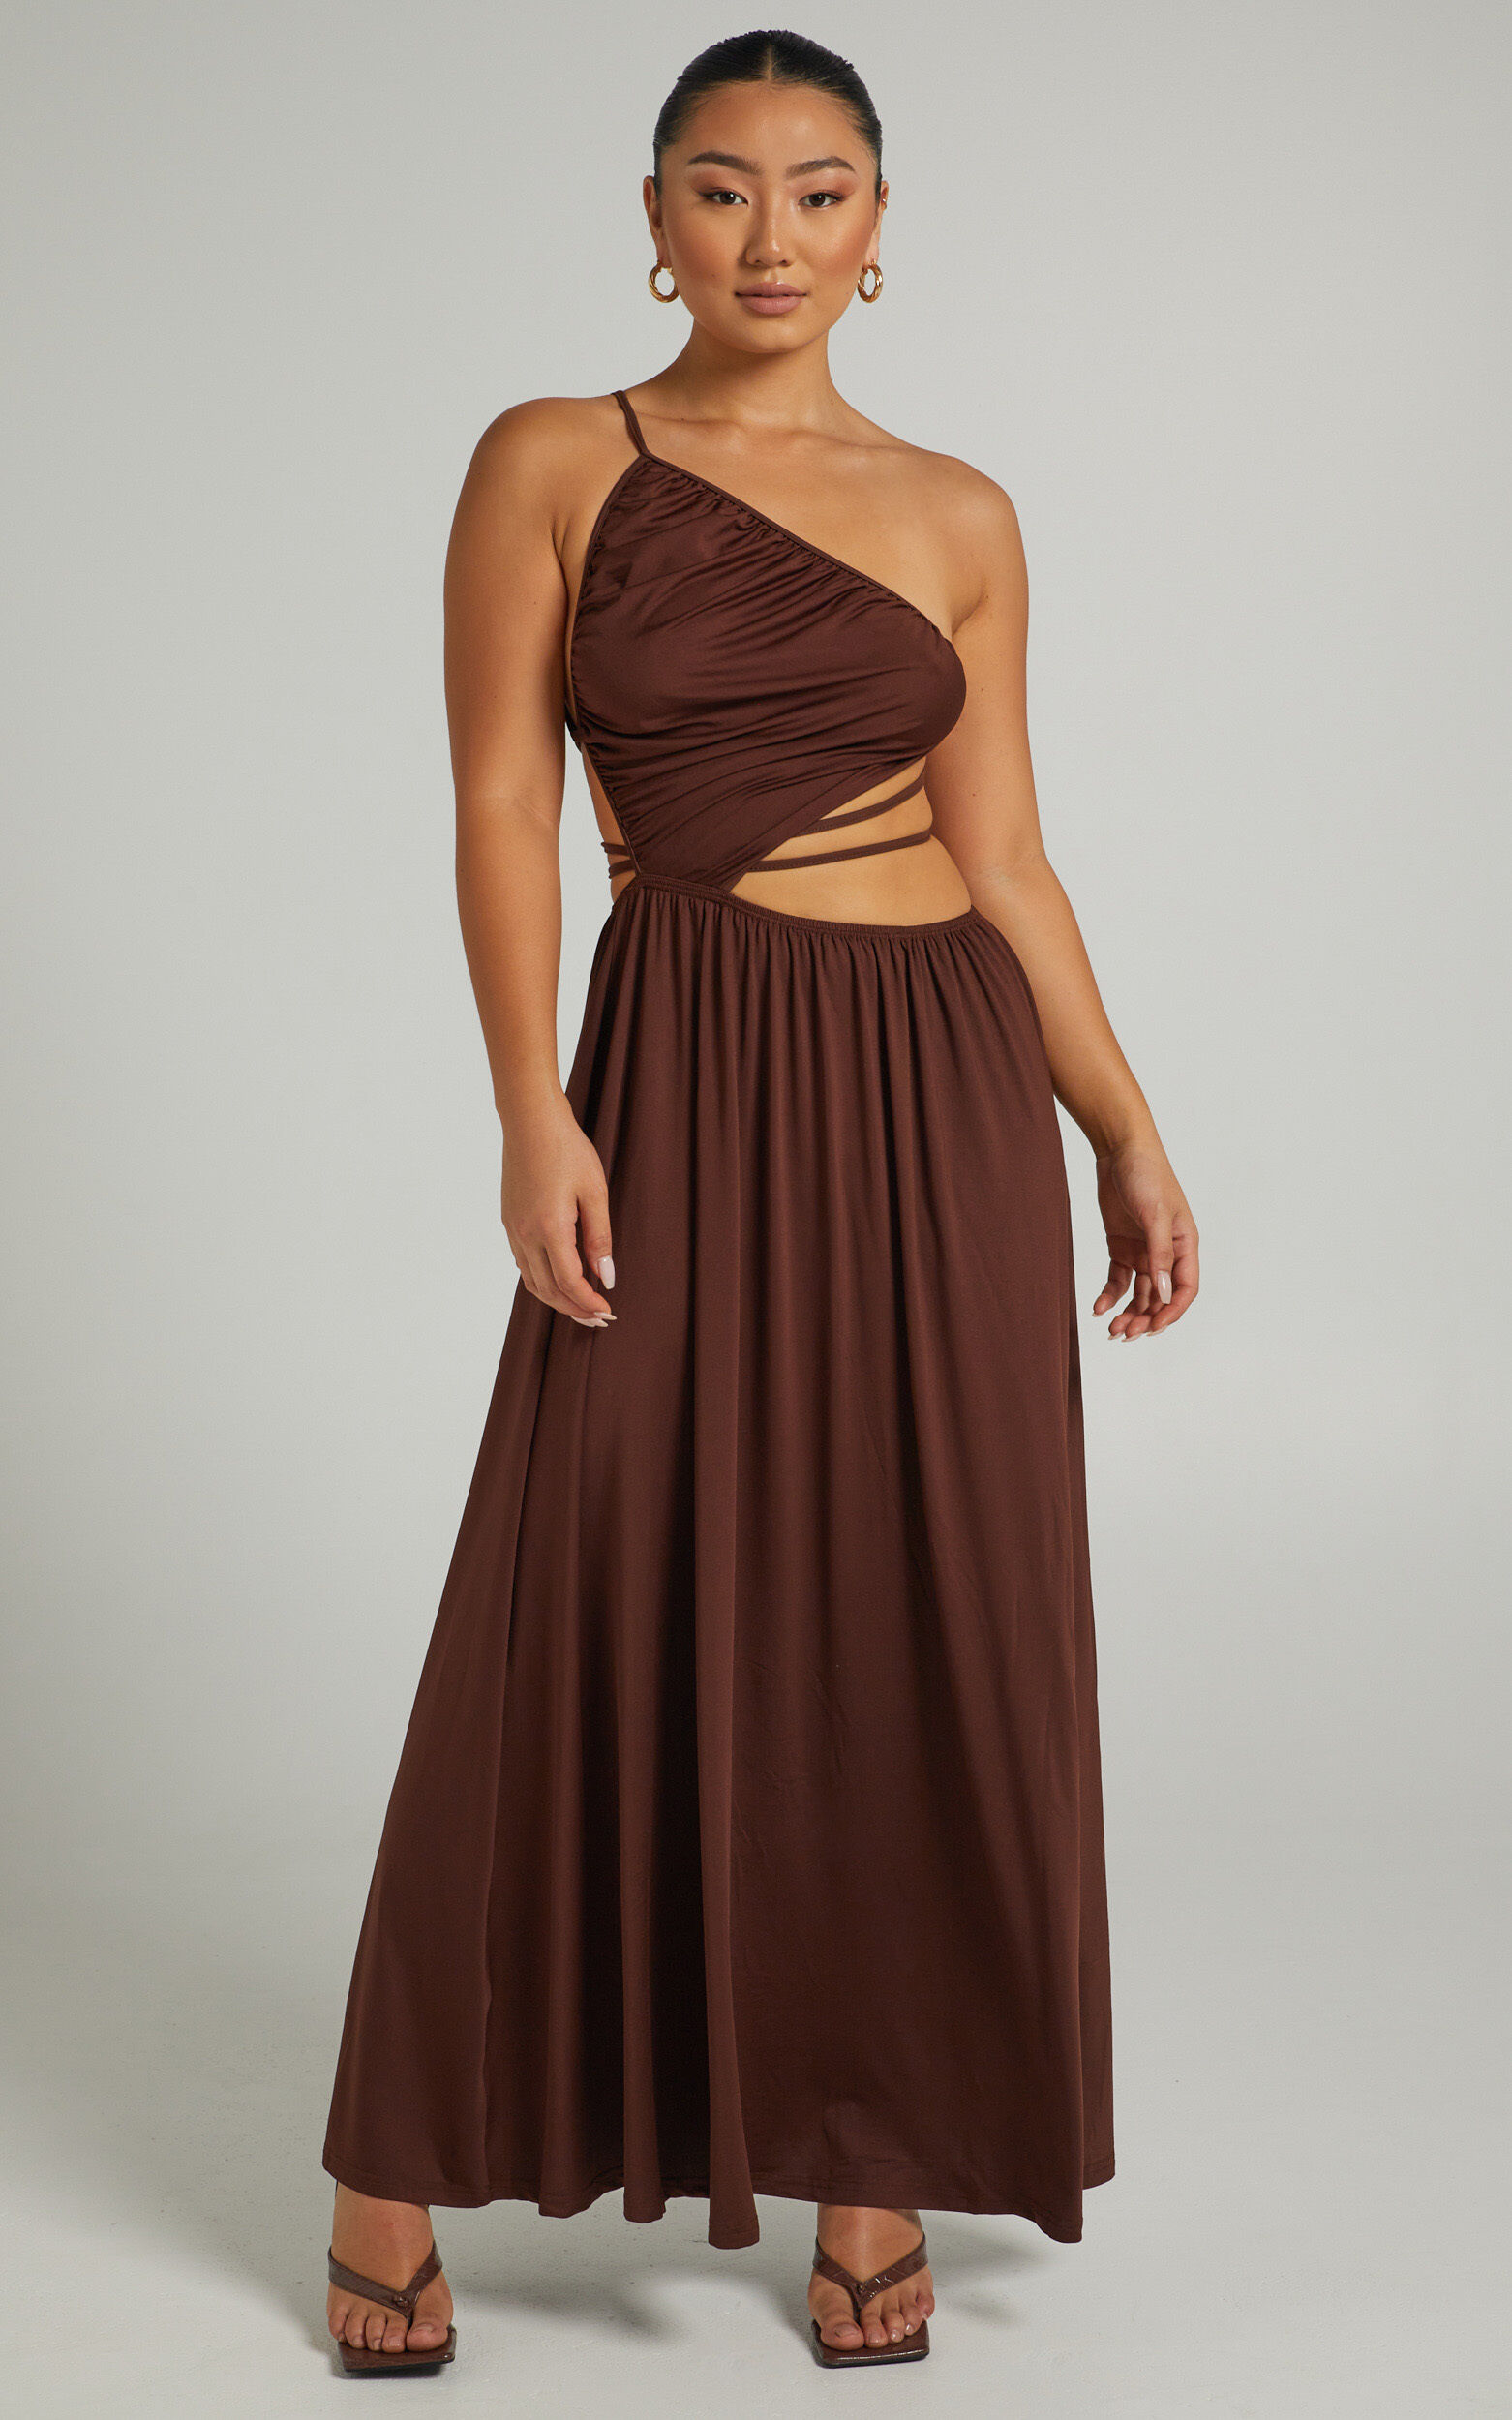 Ornella Maxi Dress with Tie up Details in Chocolate - L, BRN1, super-hi-res image number null